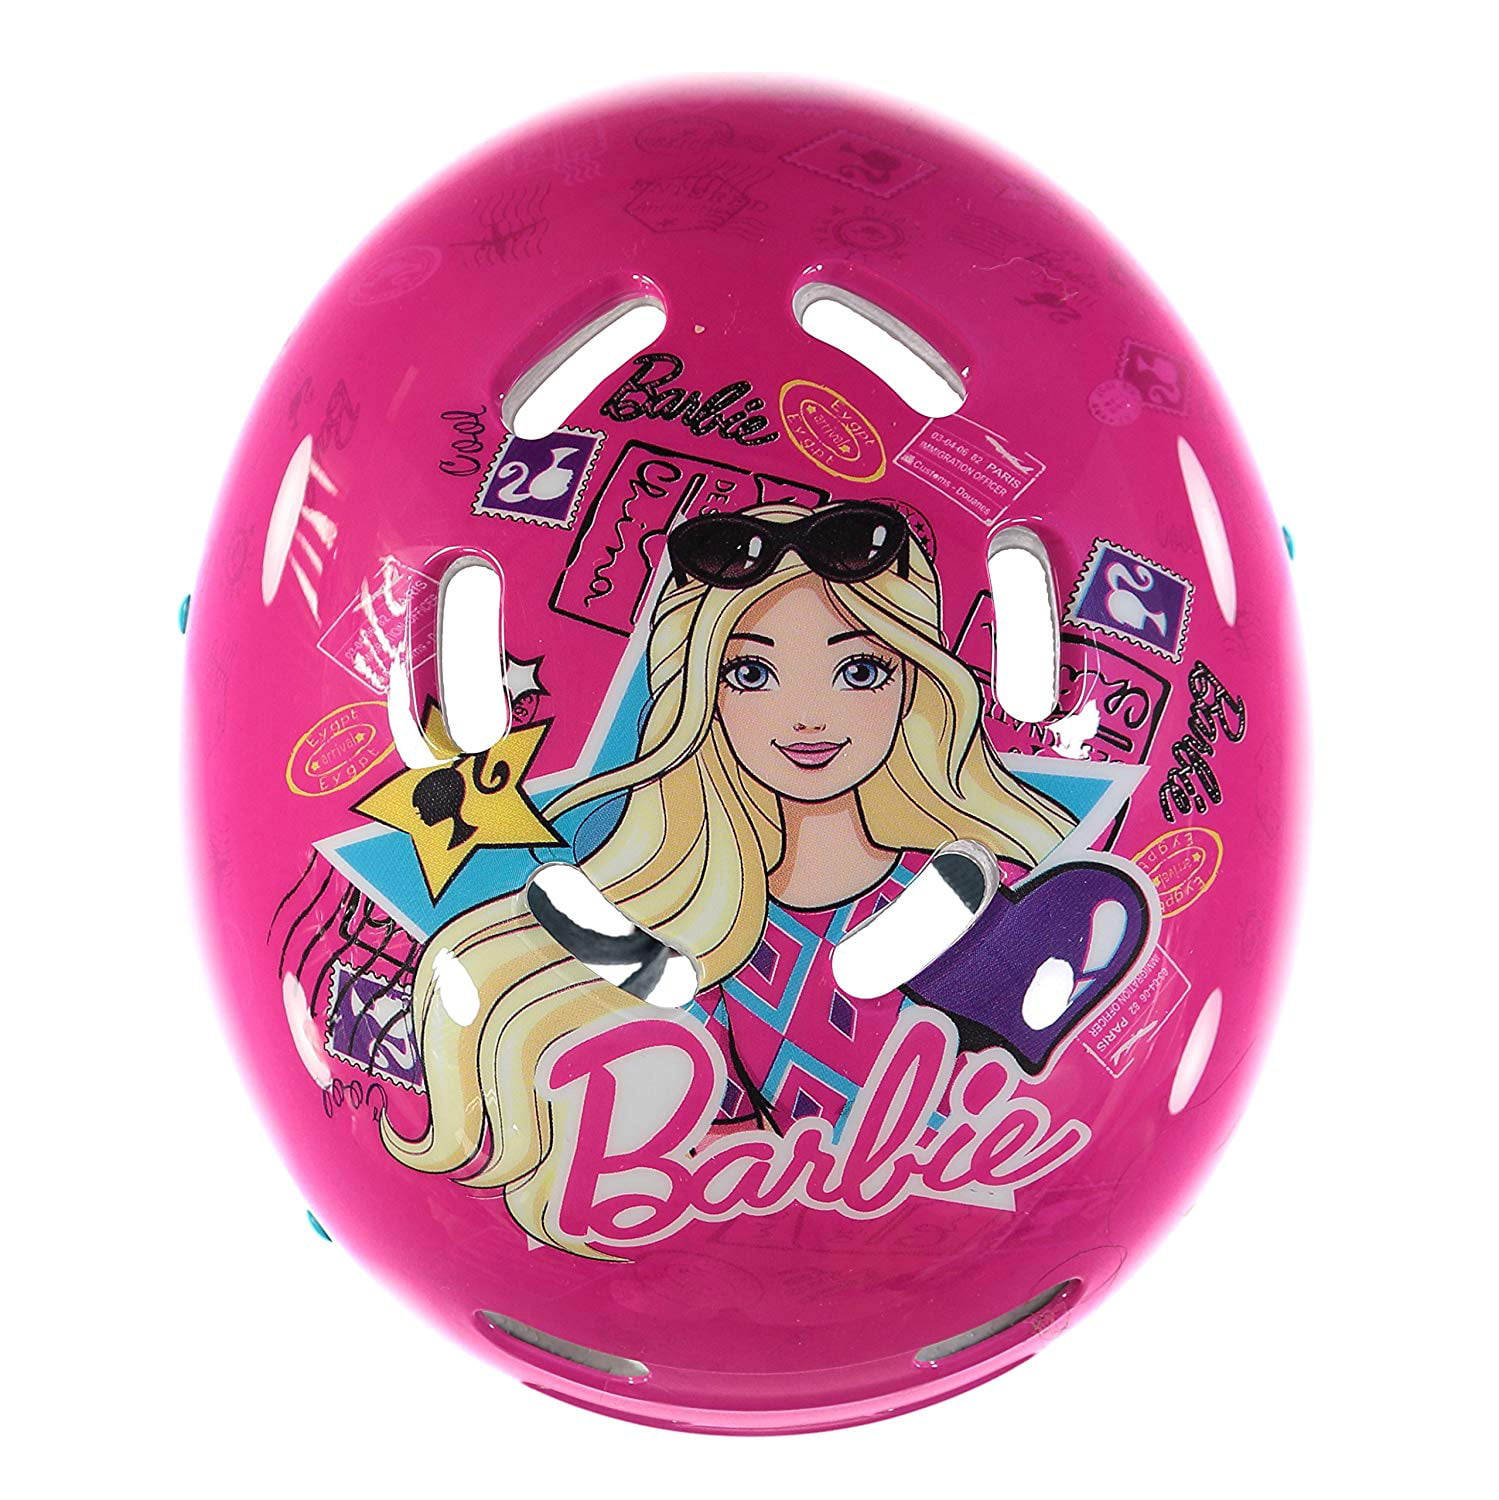 Barbie Bicycle Helmet With Dial Fit System, Adjustable Chin Strap, PVC ...